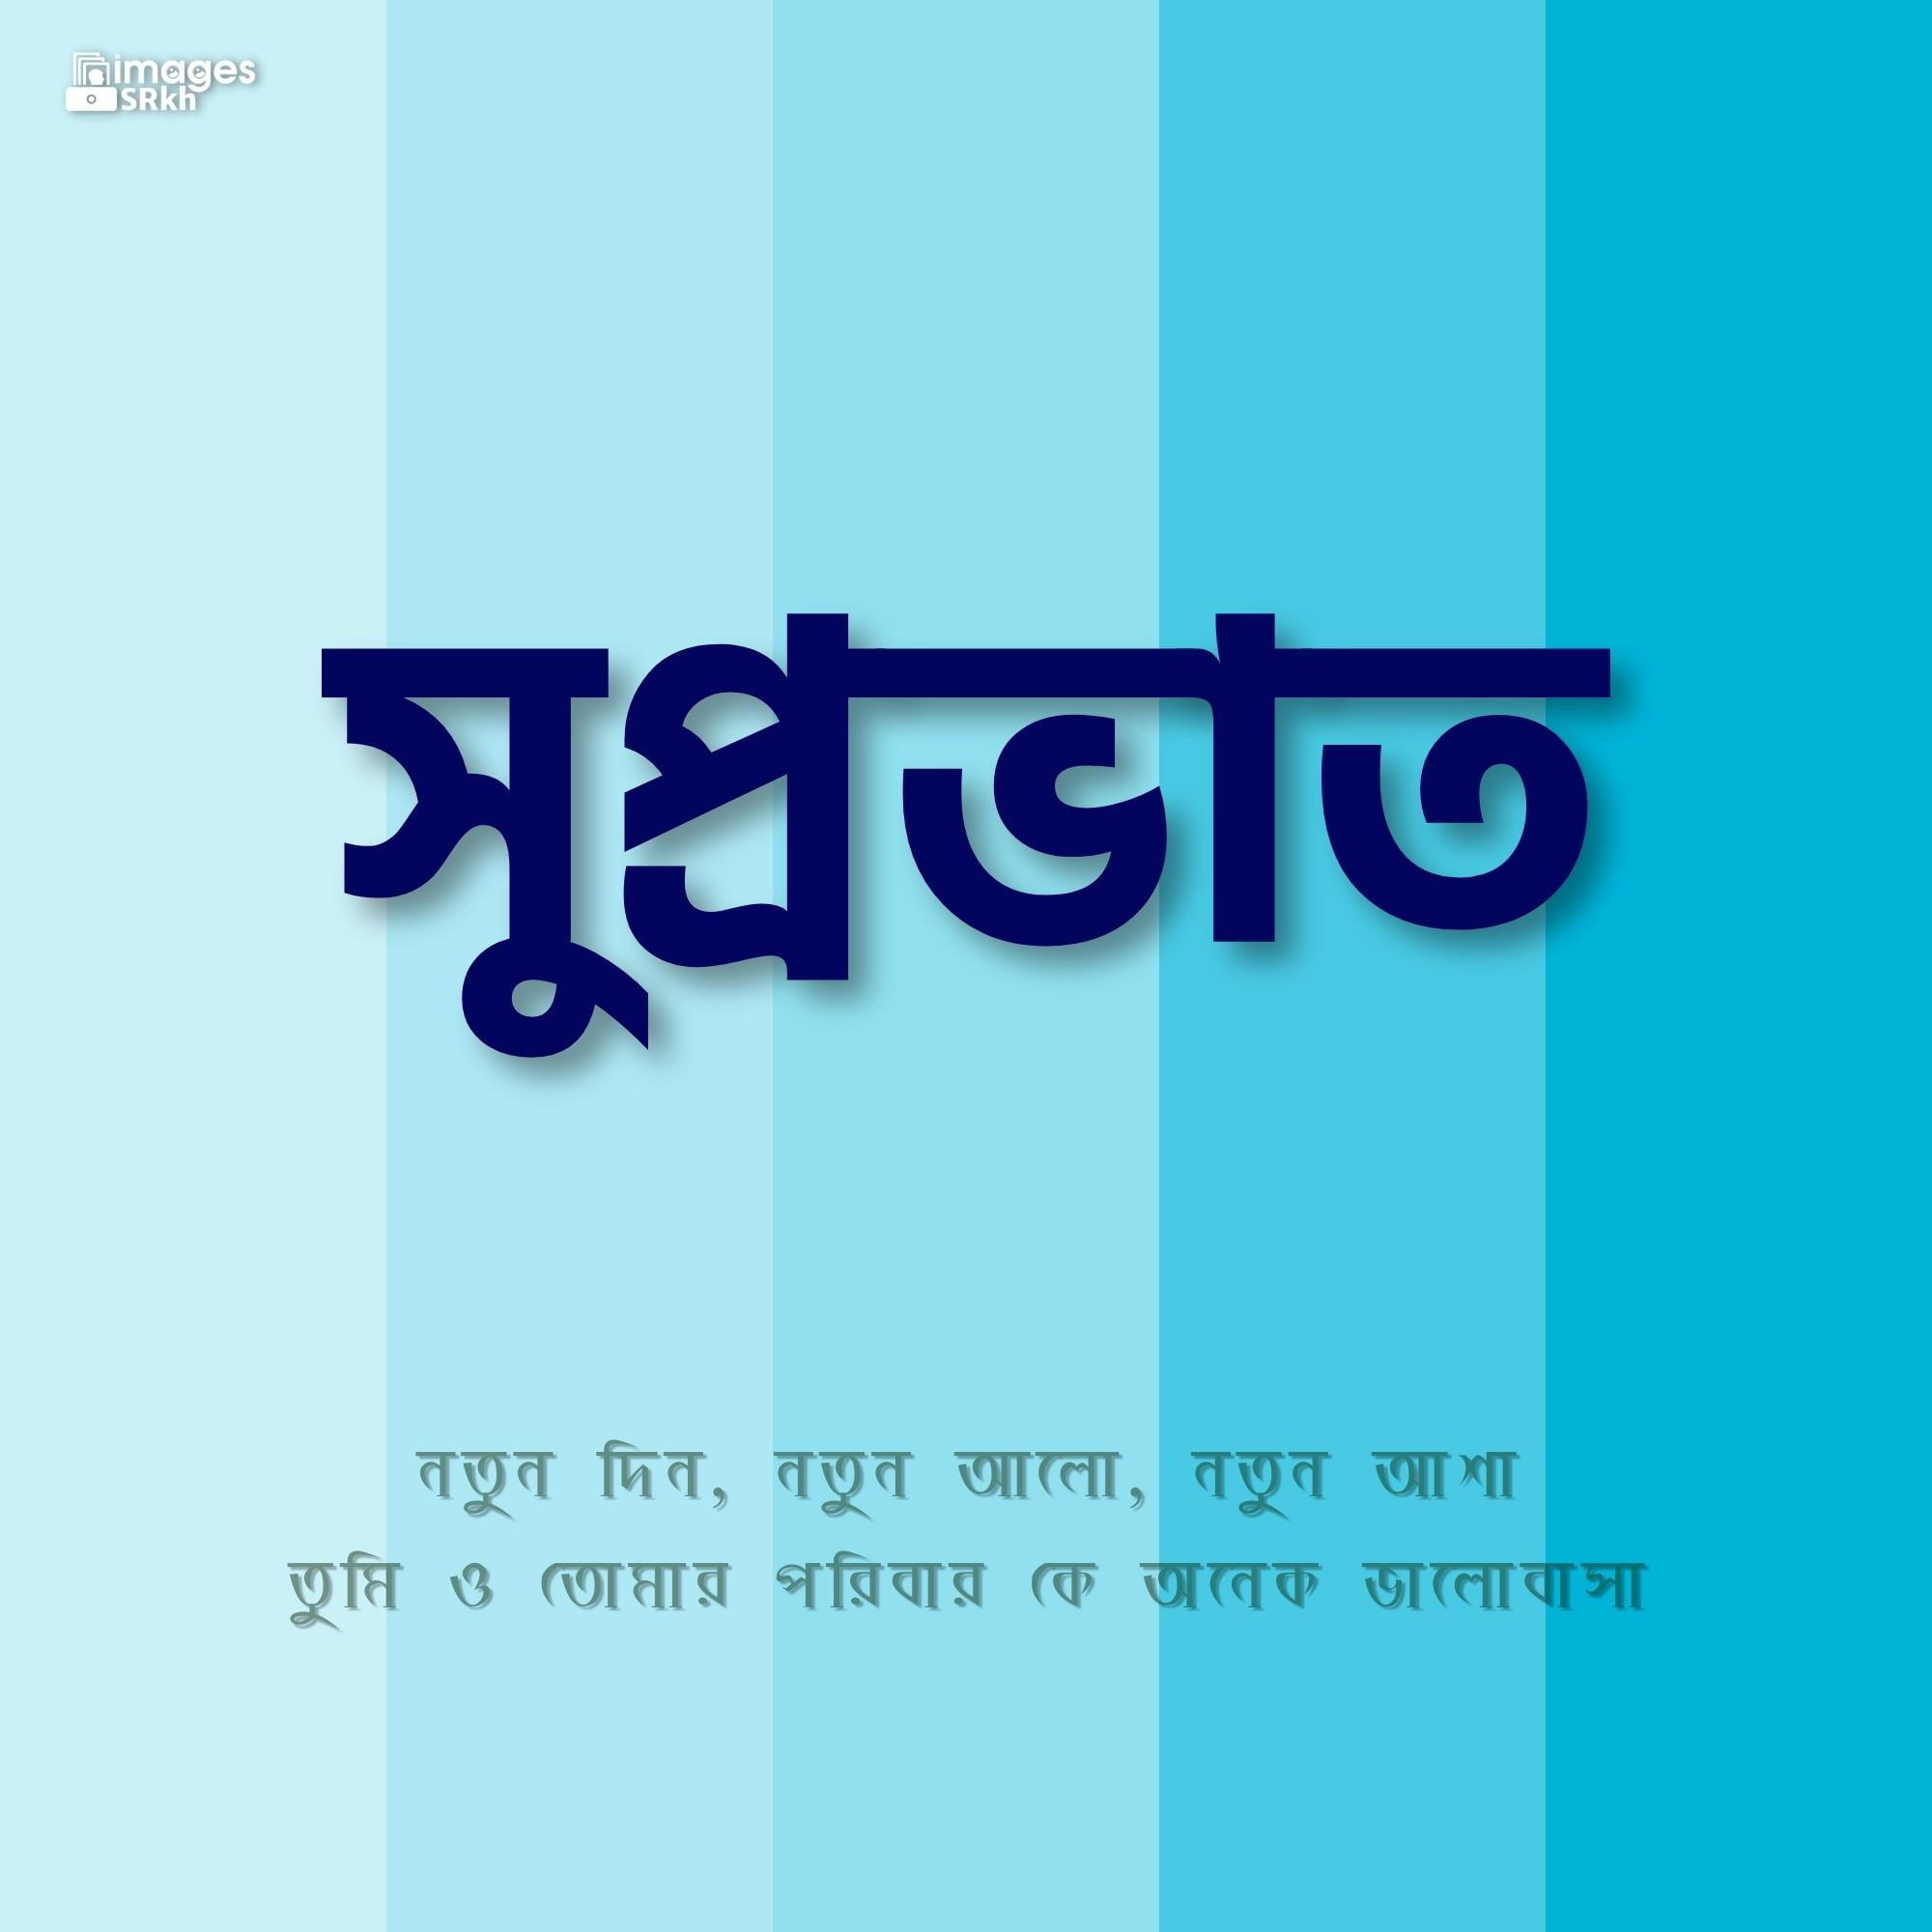 Bangla Background Images HD Pictures and Wallpaper For Free Download   Pngtree